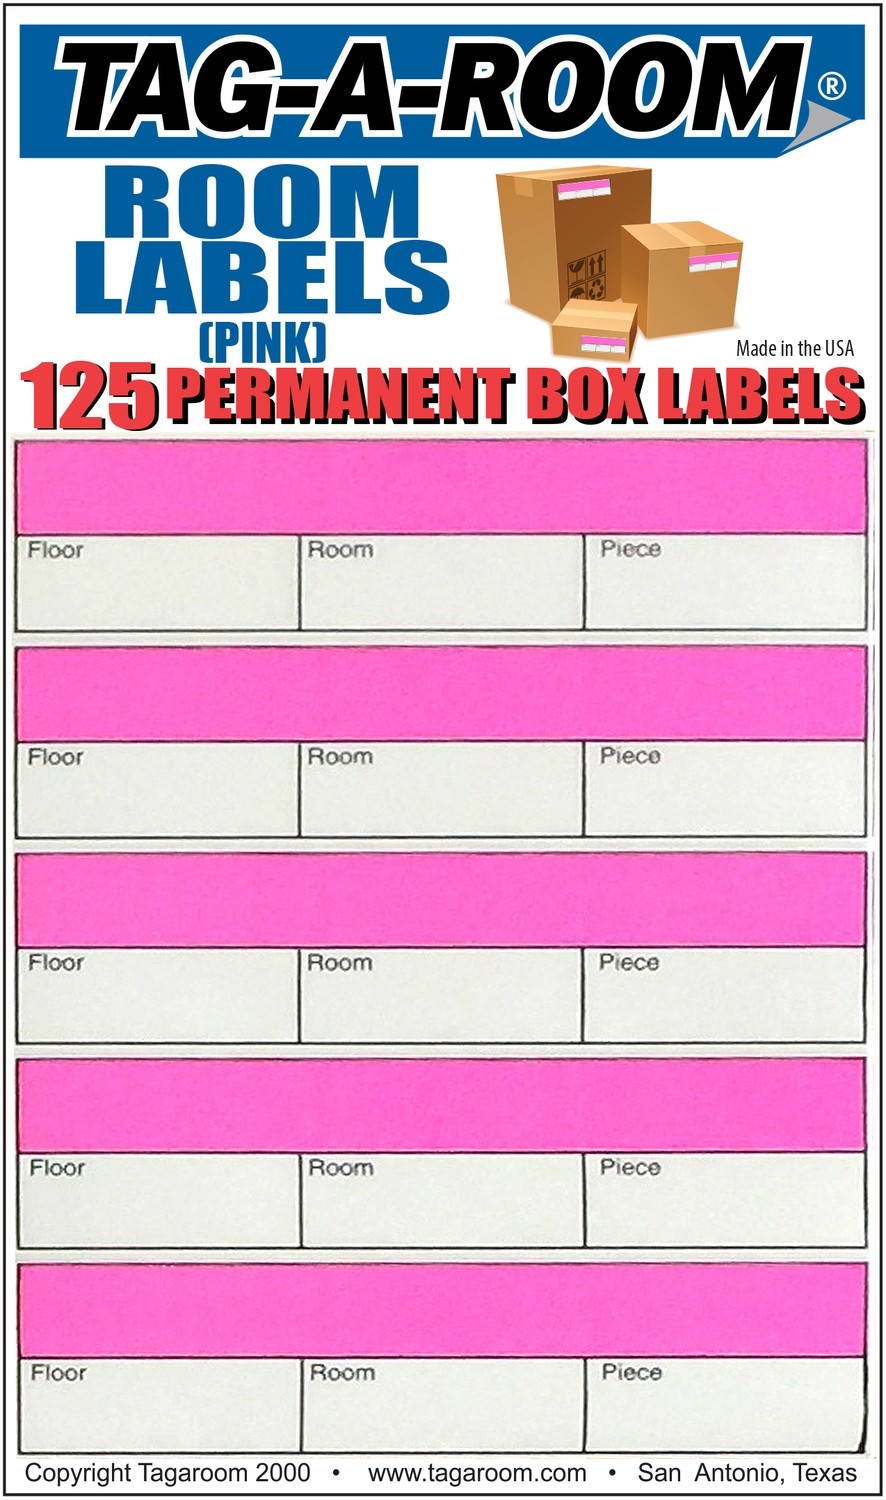 Office - Label - Room - Pink - 125 Count